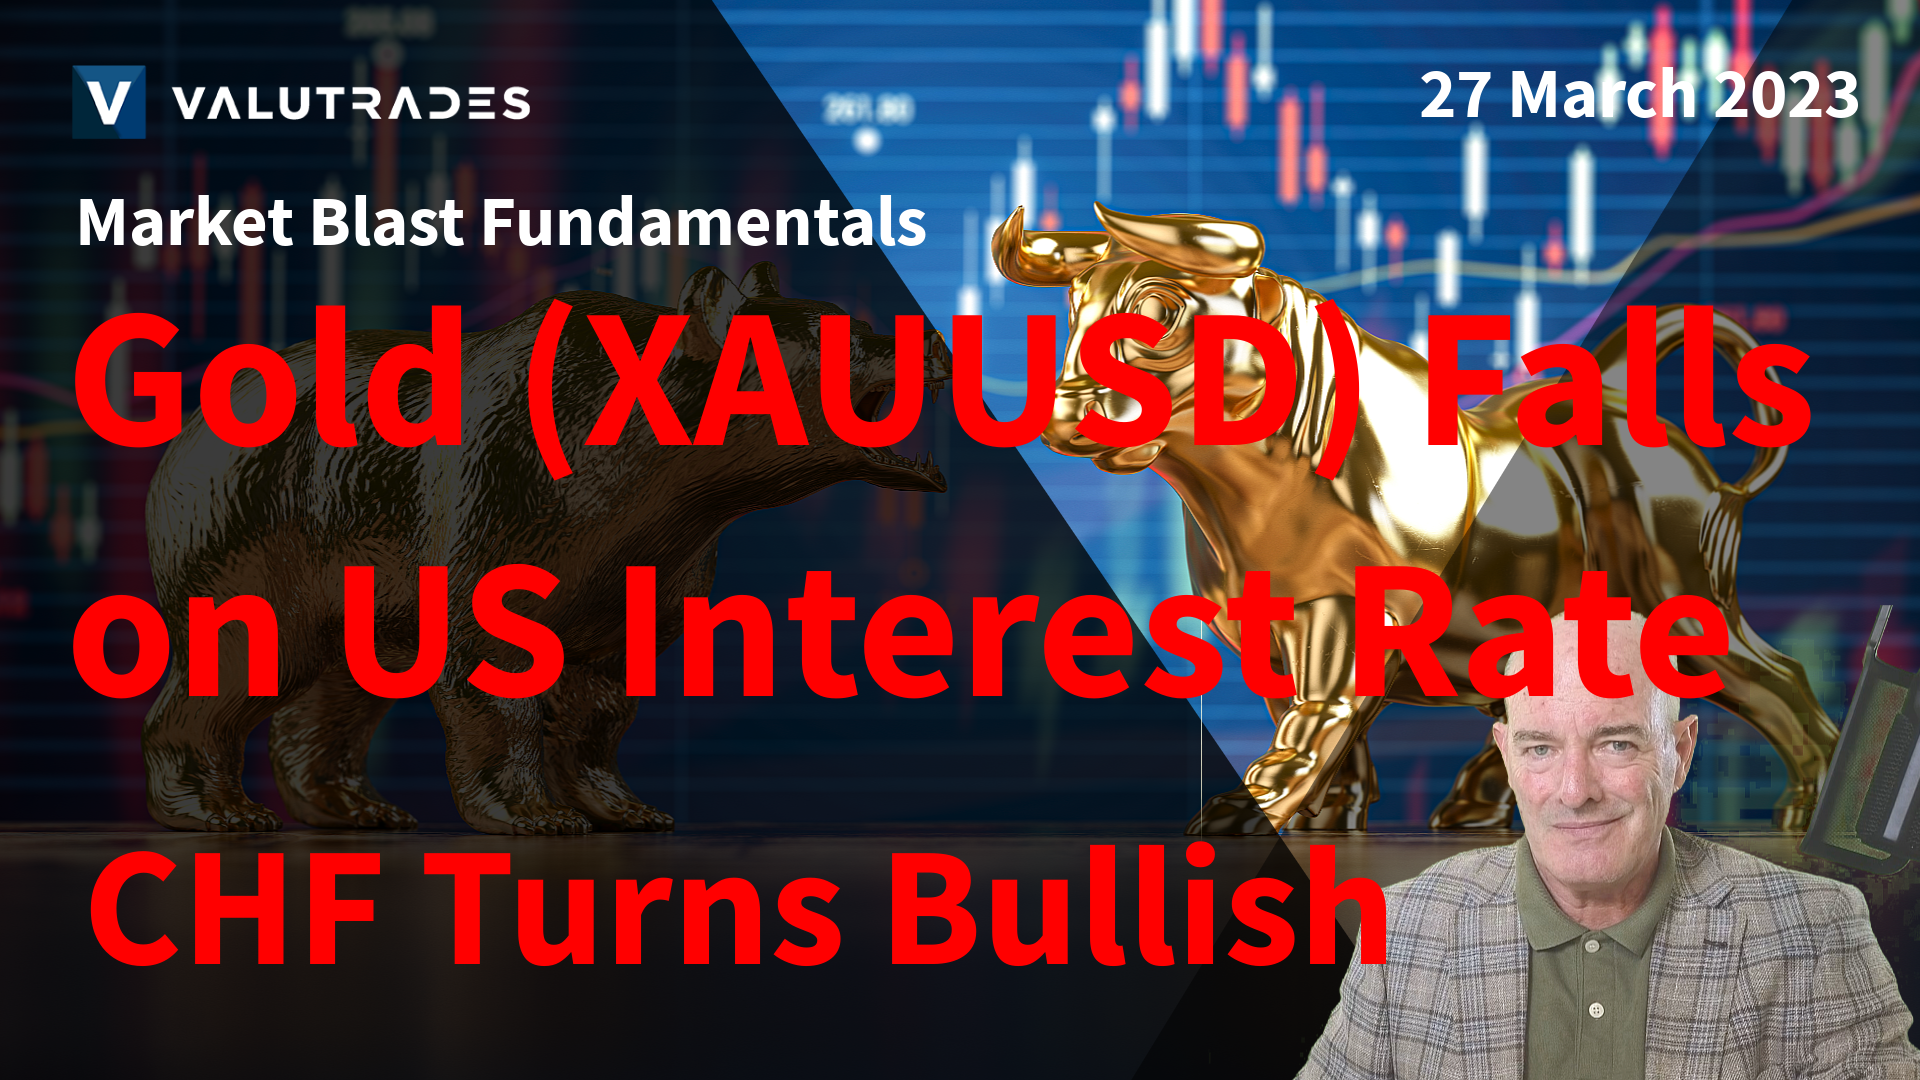 Gold (XAUUSD) Falls on US Interest Rate. CHF Turns Bullish. Central Banks in Focus.